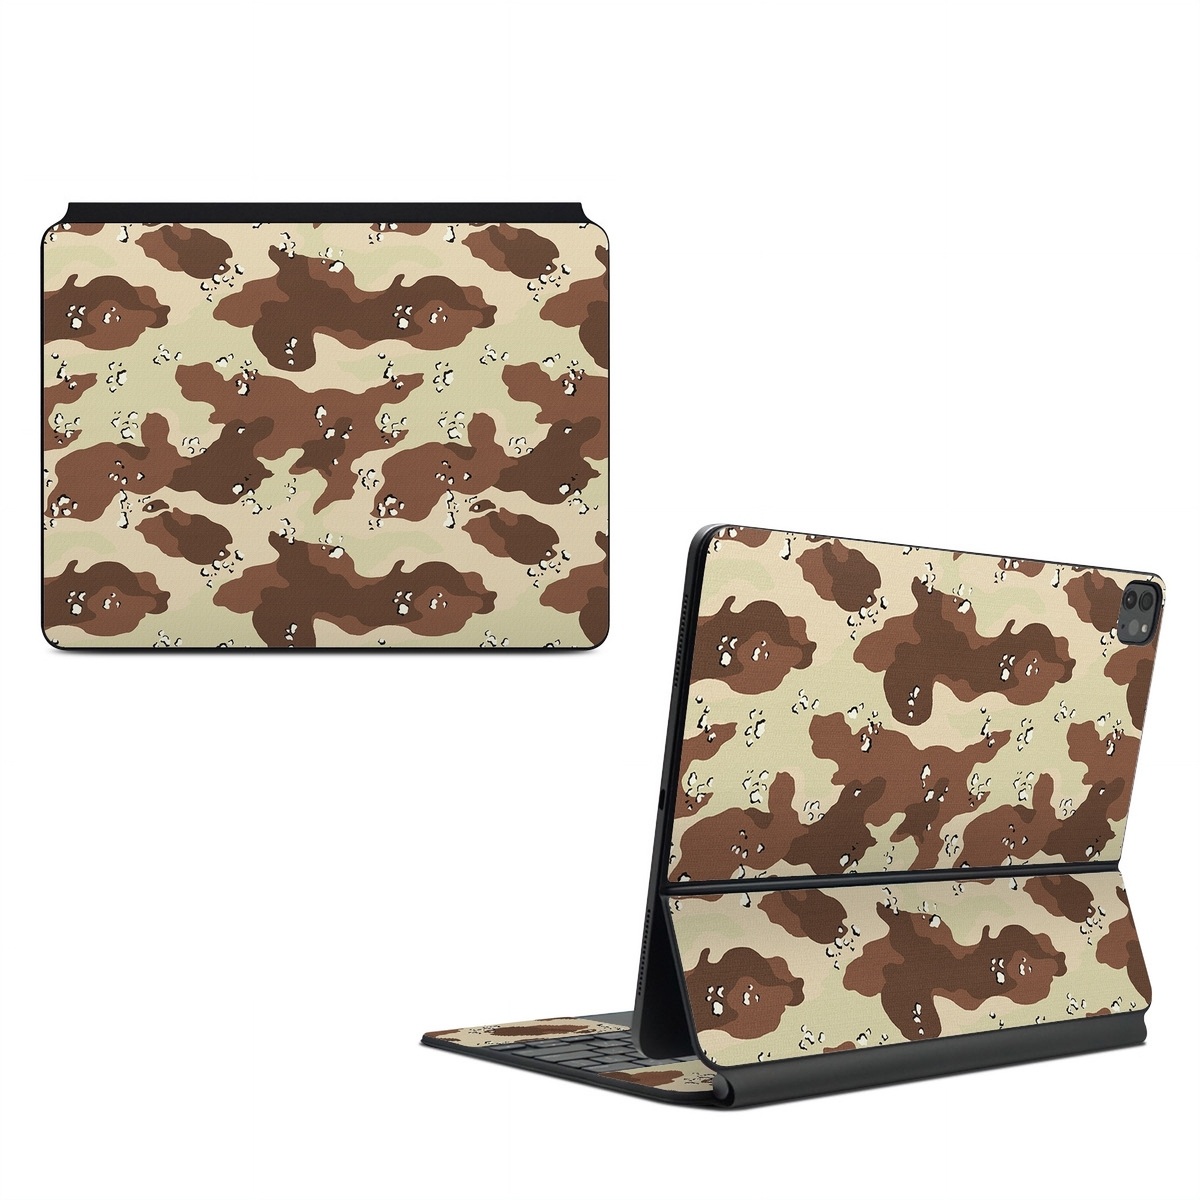 Magic Keyboard for iPad Series Skin design of Military camouflage, Brown, Pattern, Design, Camouflage, Textile, Beige, Illustration, Uniform, Metal, with gray, red, black, green colors